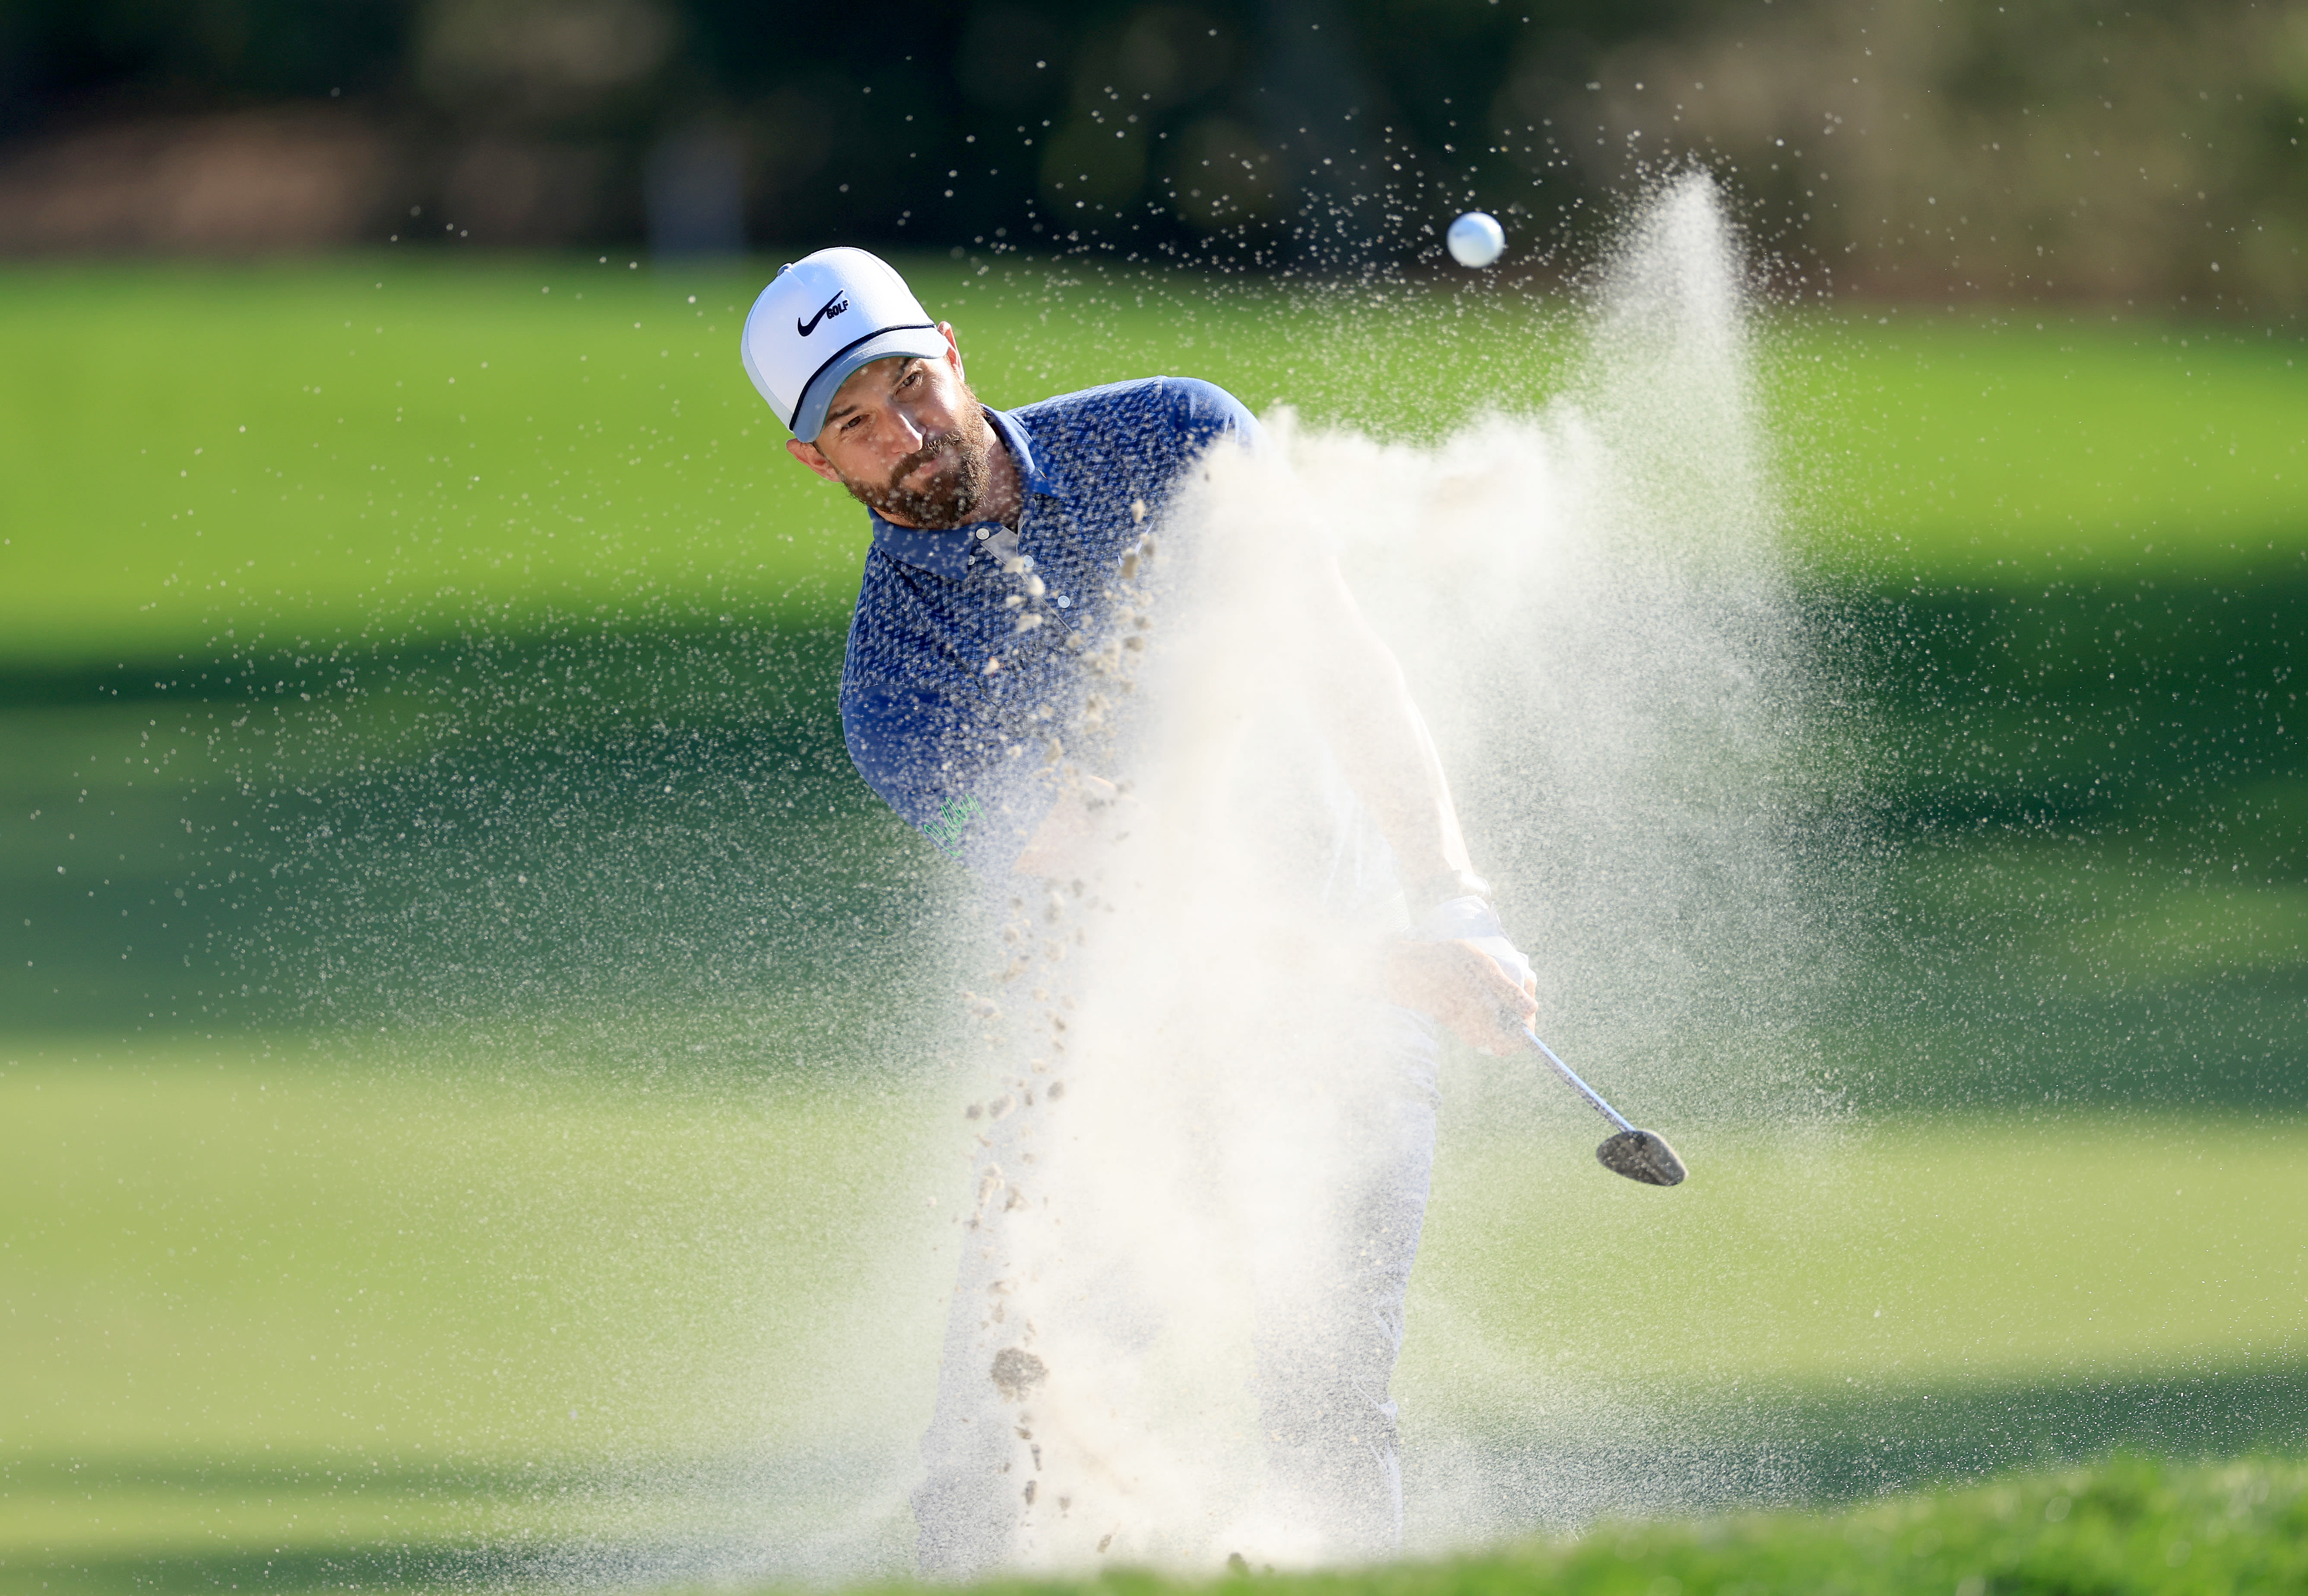 Greg Koch on the first hole during the second round of the 2023 Arnold Palmer Invitational in Orlando, Florida. (Photo by David Cannon/Getty Images)